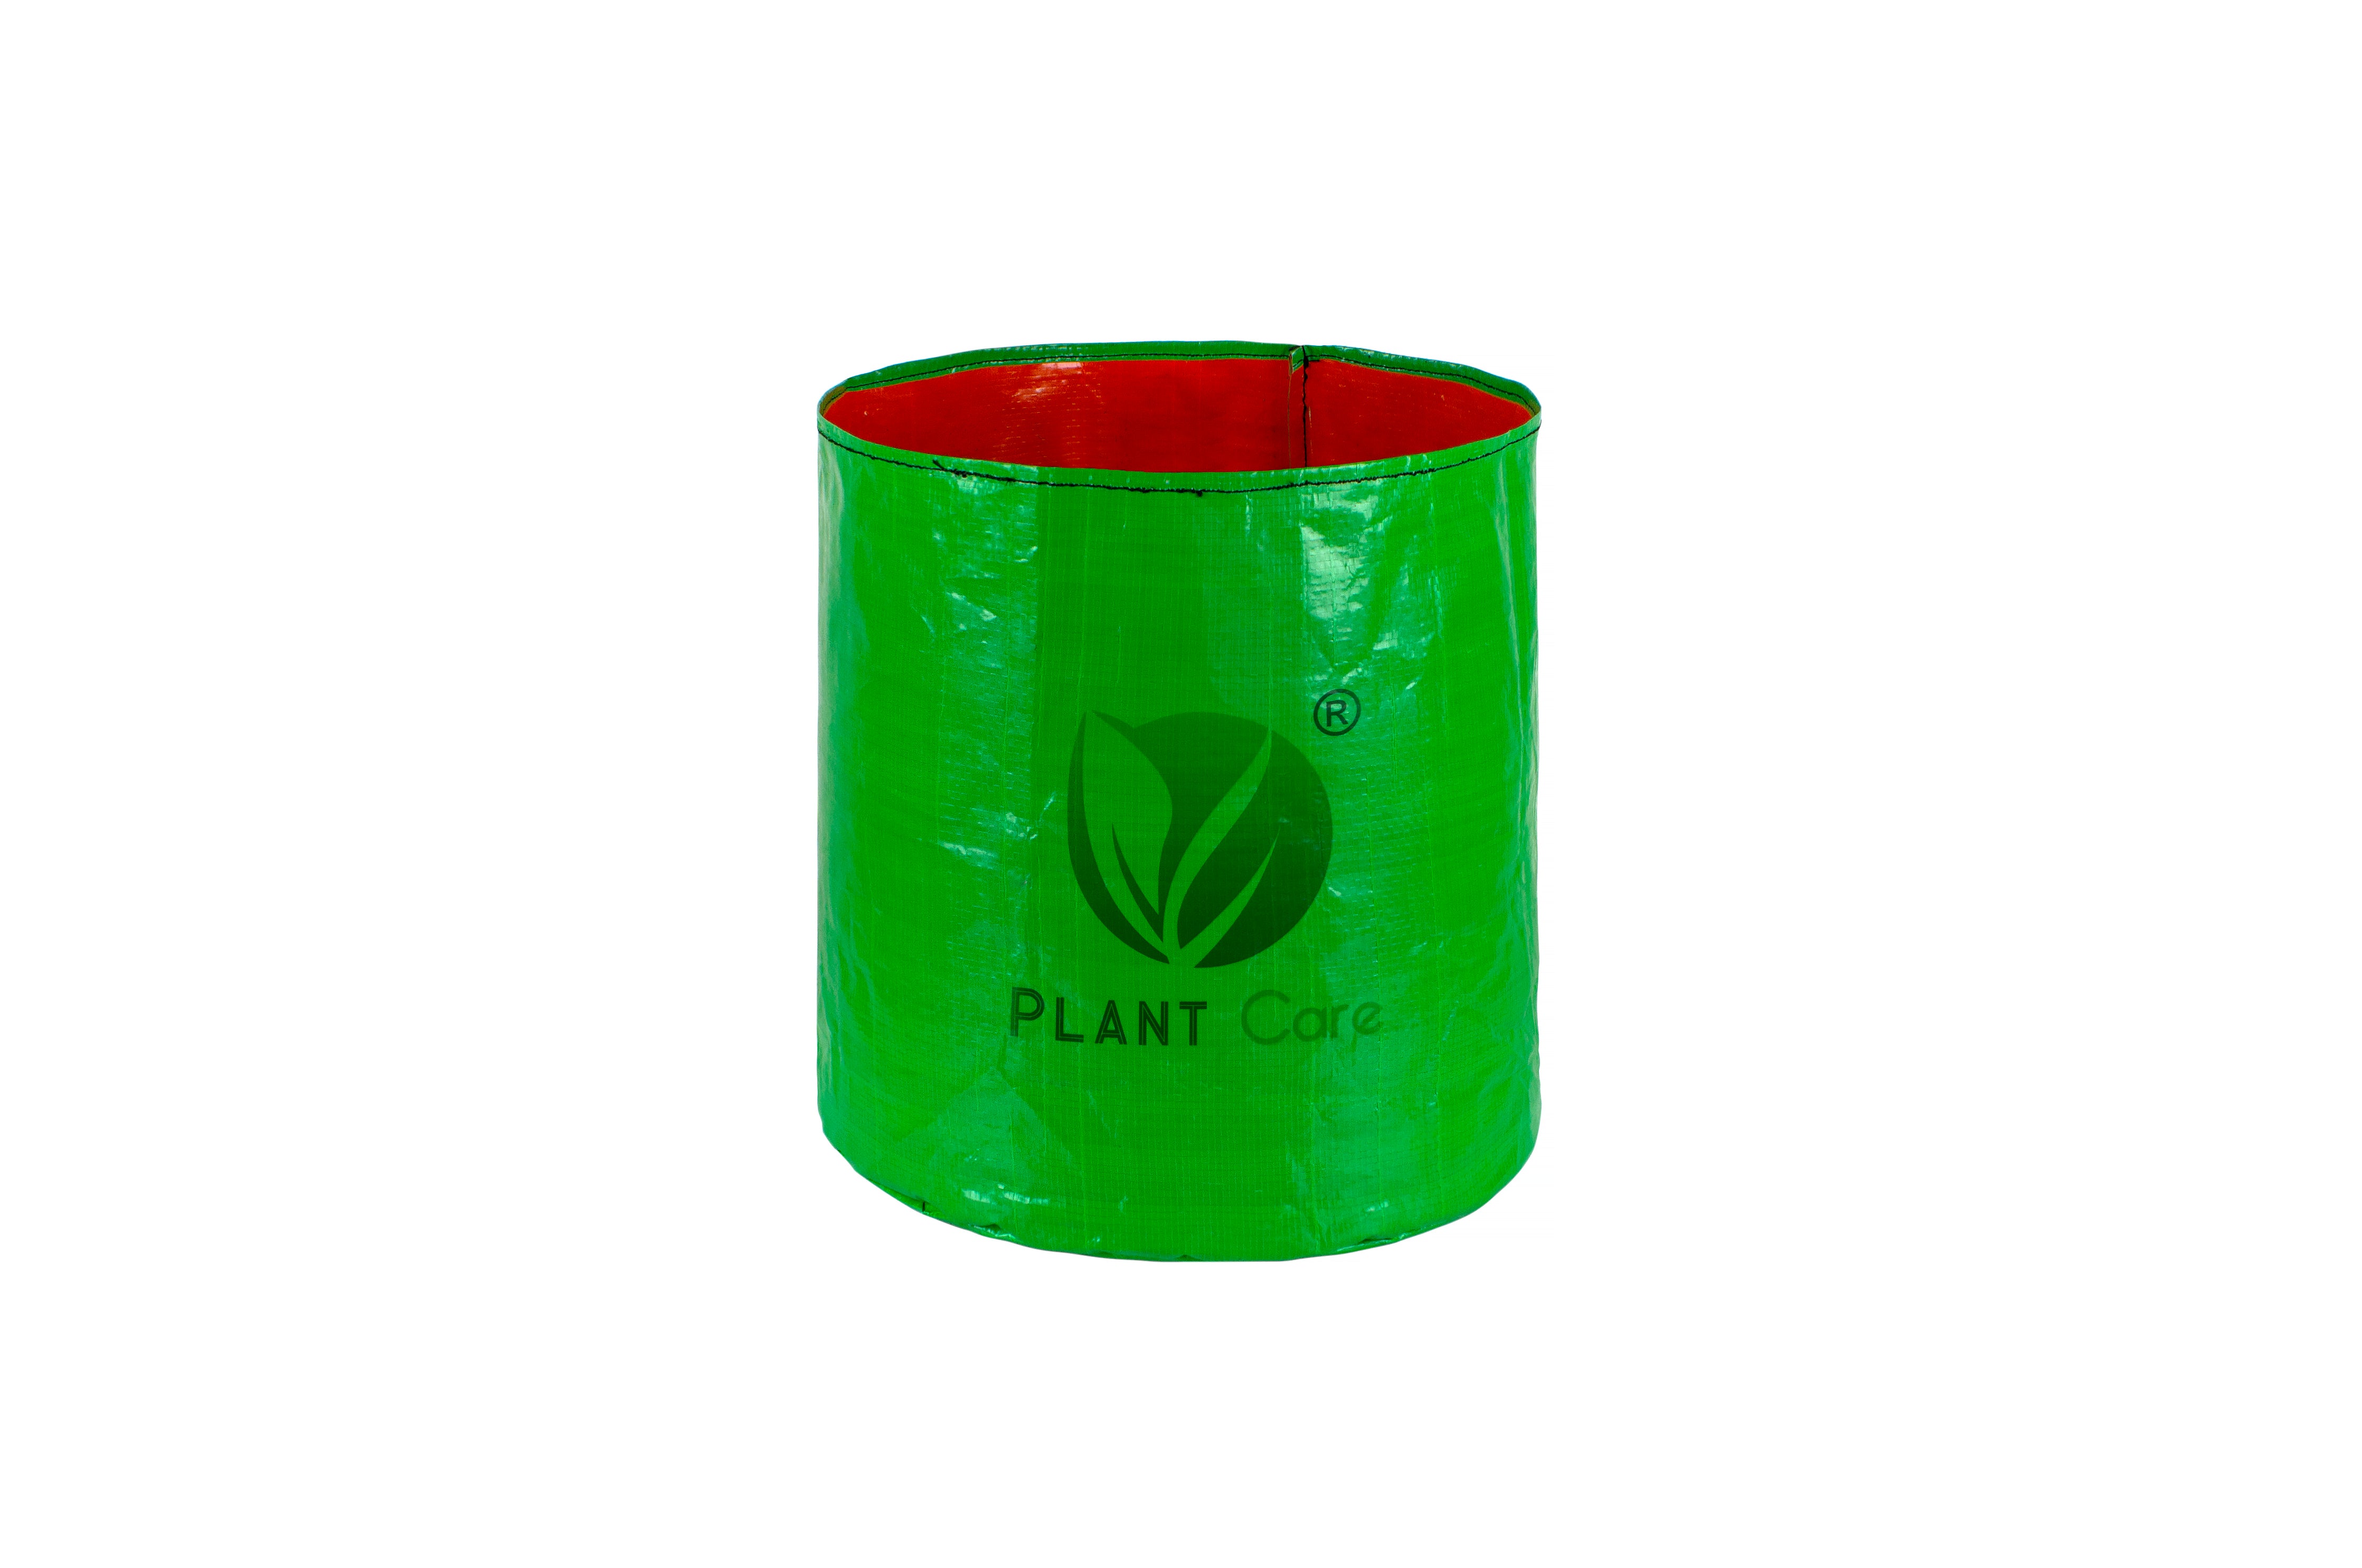 12 inch diameter circular grow bag for plants and vegetables